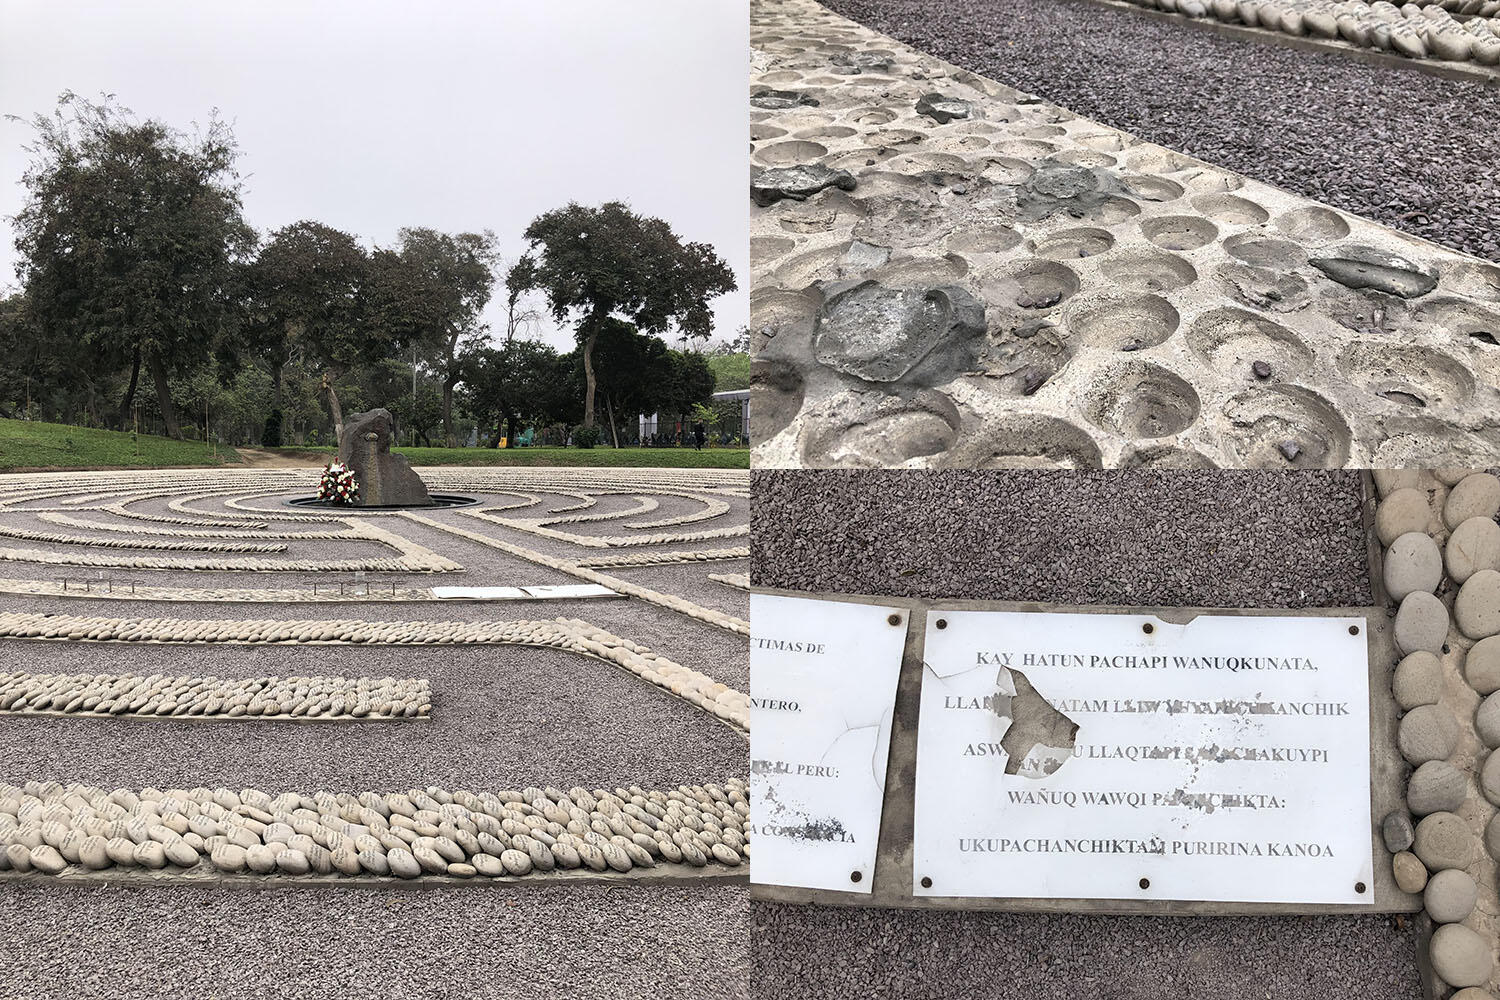  Damage done by vandals, who stole memorial stones and defaced a plaque written in Quechua. (Photos by Emily Fjaellen Thompson.)